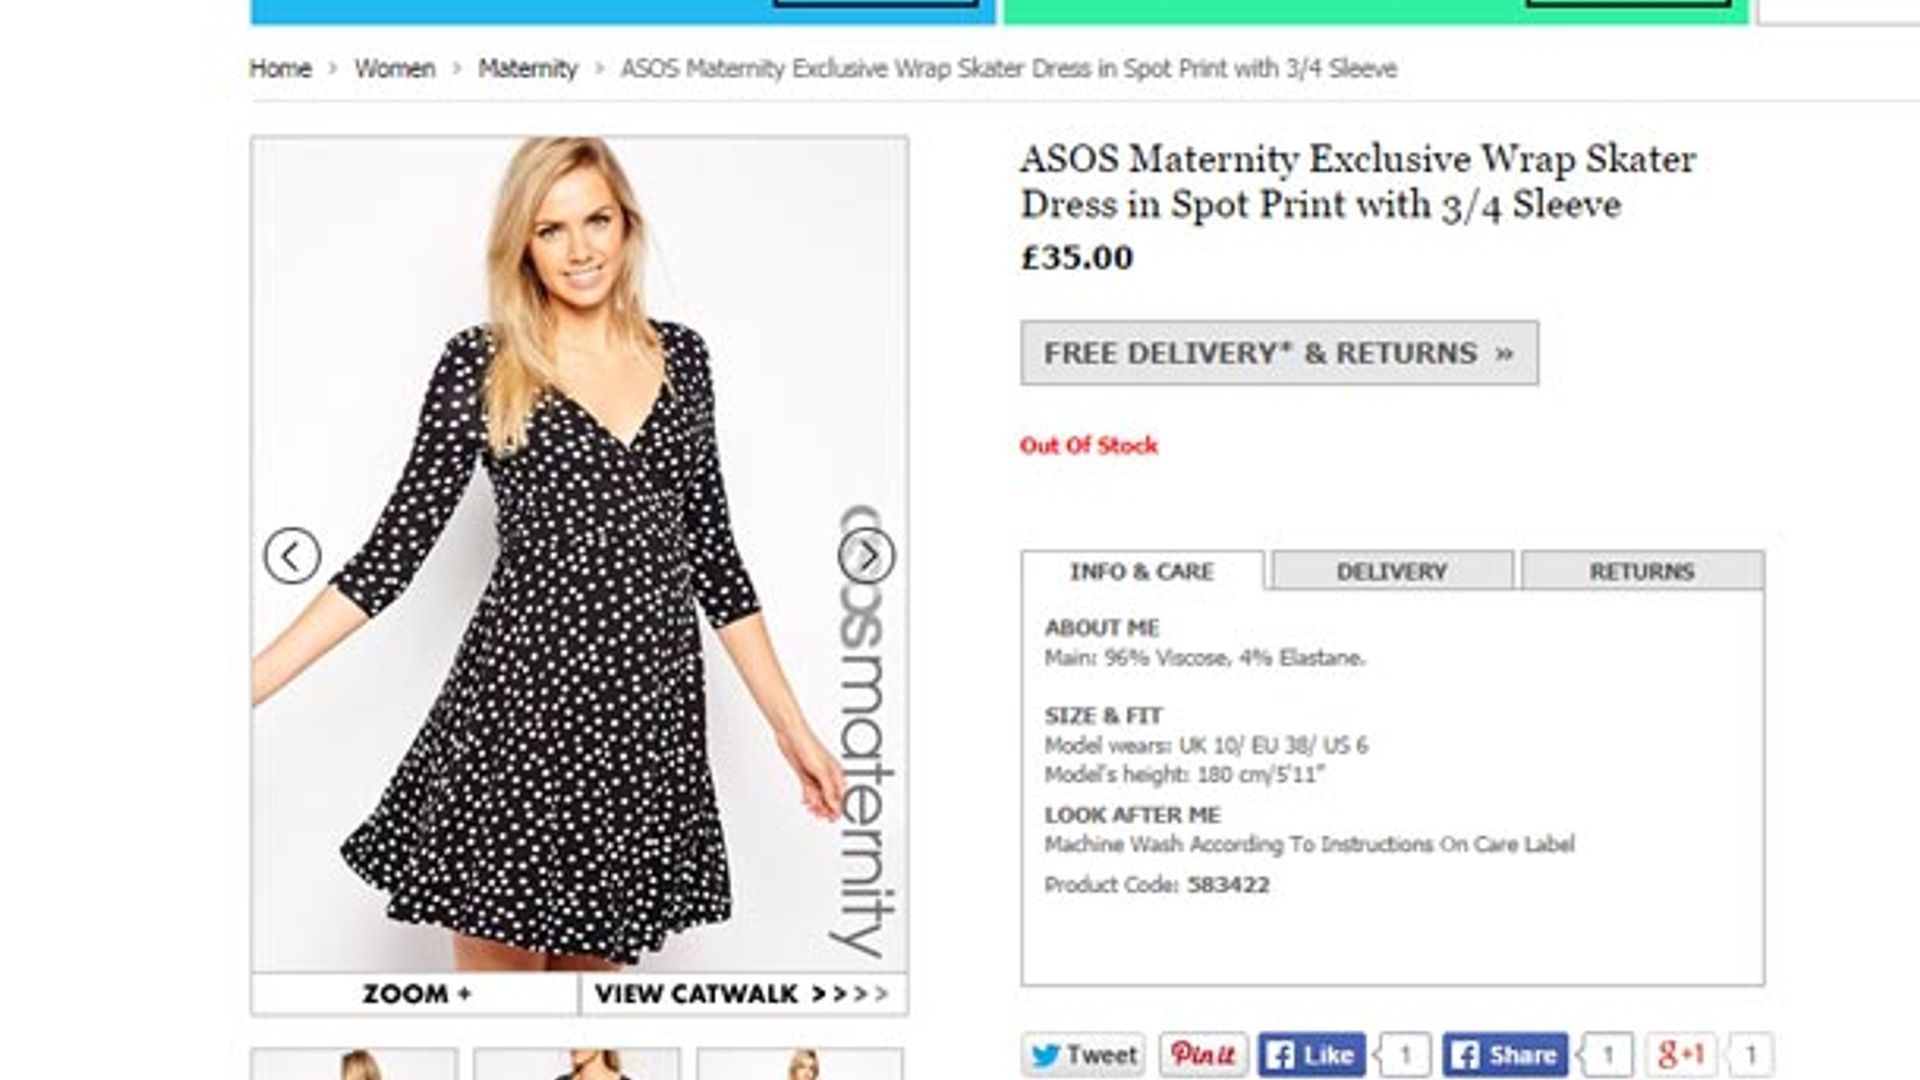 Kate Middleton's £35 ASOS dress sells out in minutes | HELLO!